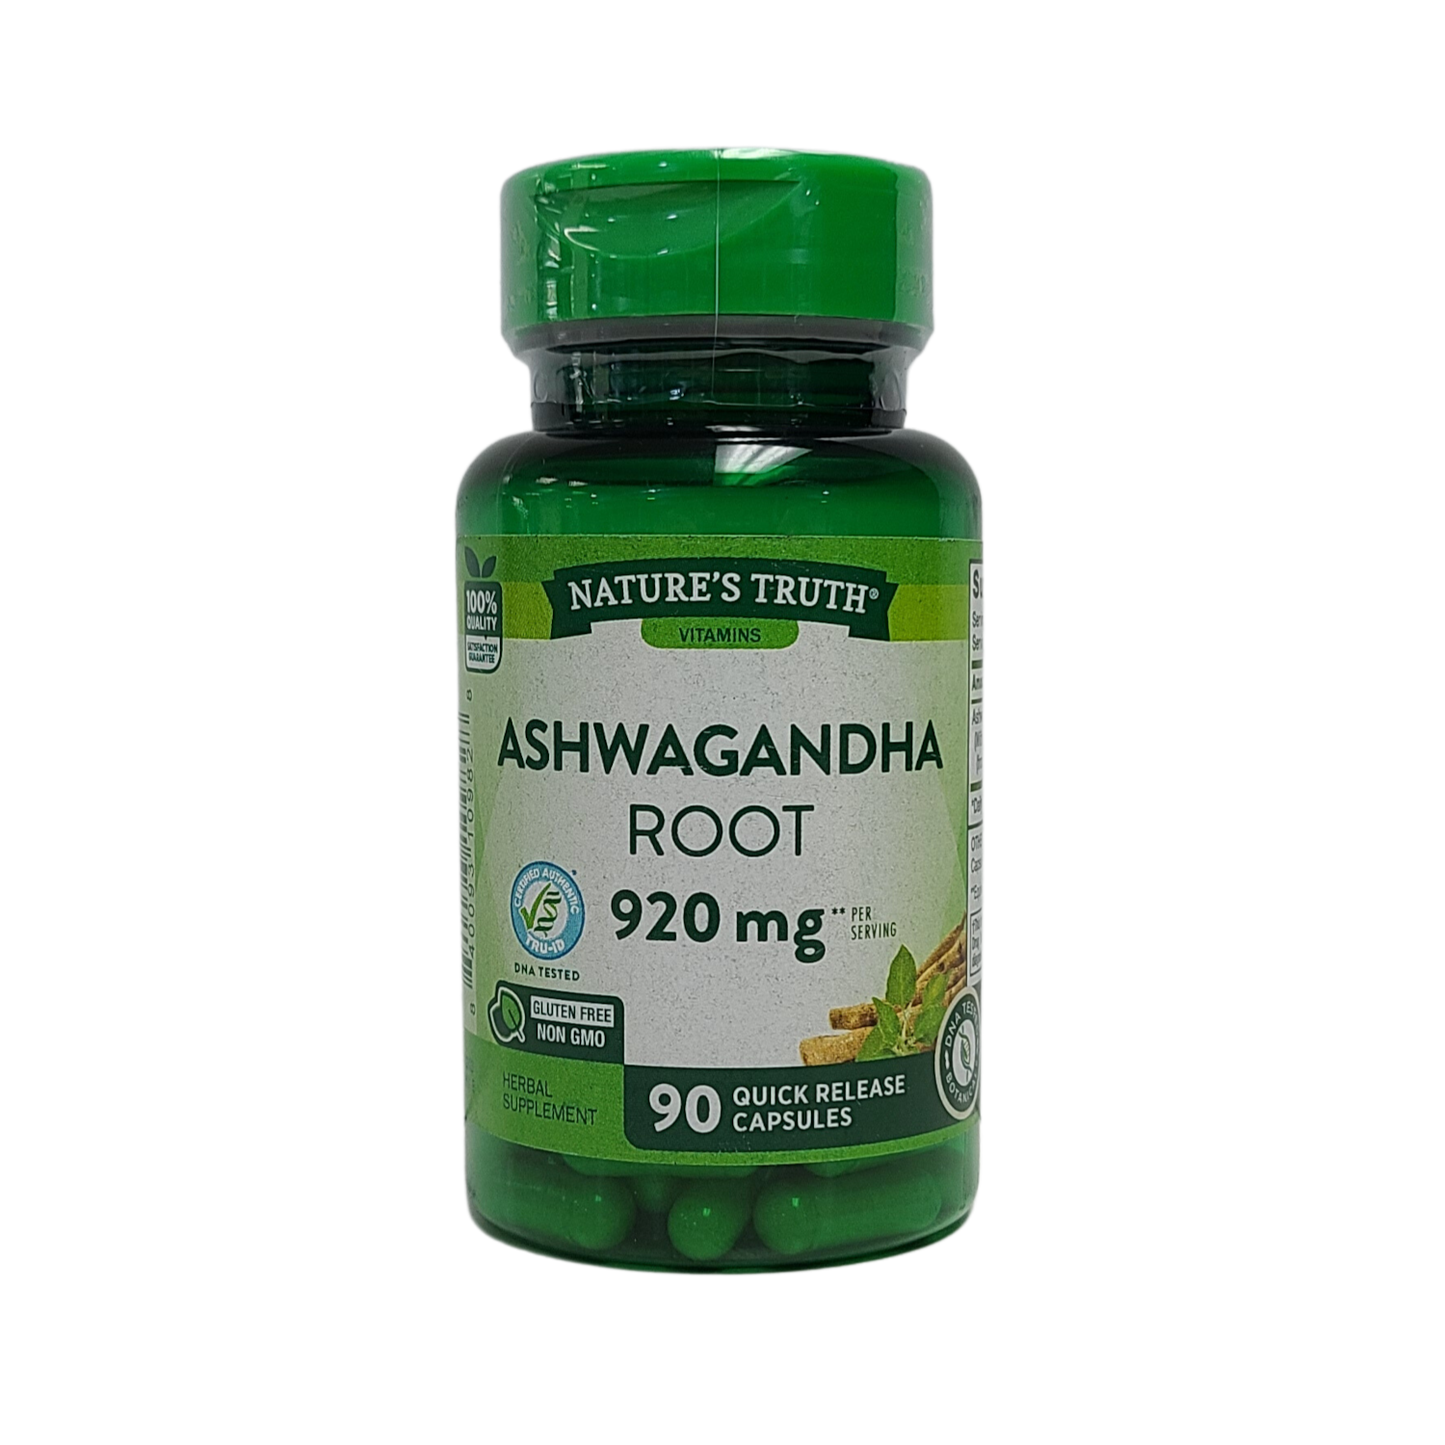 Nature's Truth Ashwagandha Root 920 mg - 90 Quick Release Capsules